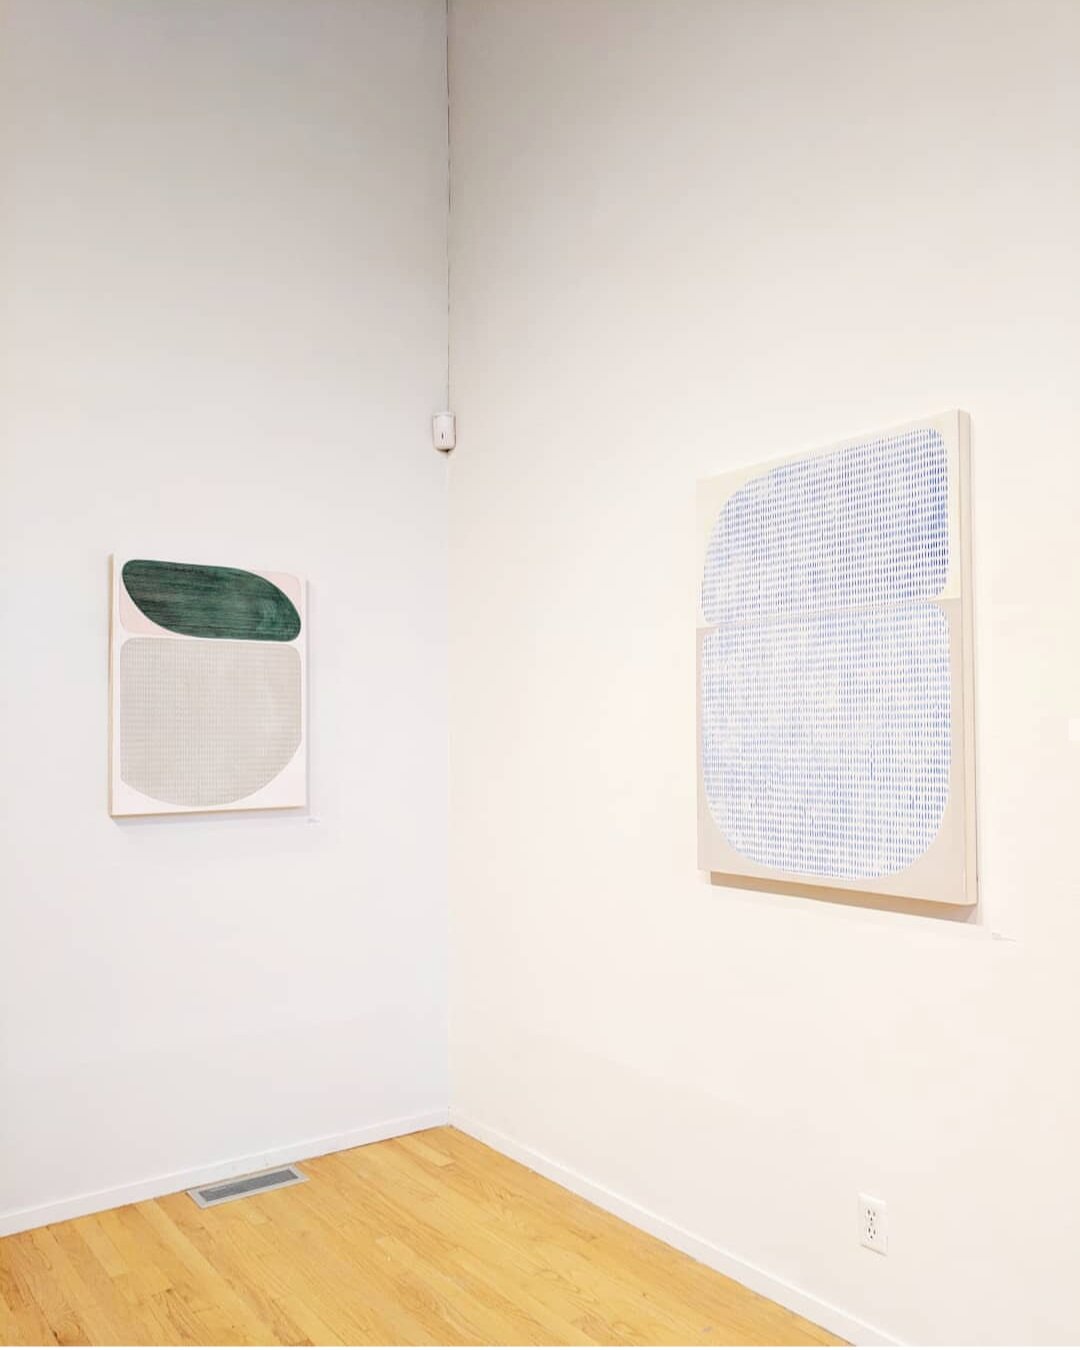  Gallery View of “1964 Marble” and “Iceberg” 